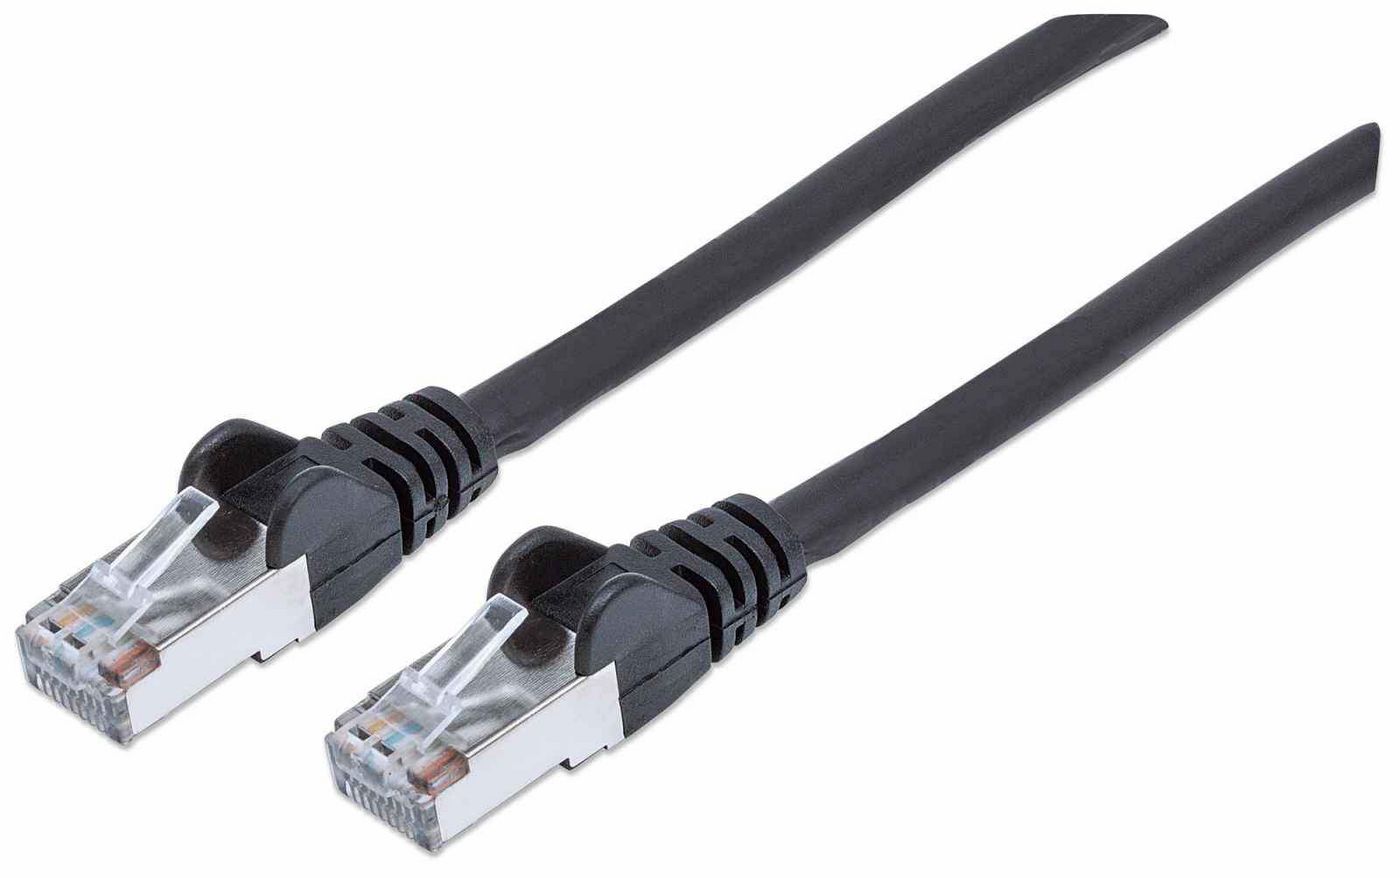 Intellinet 740876 High Performance Network Cable 